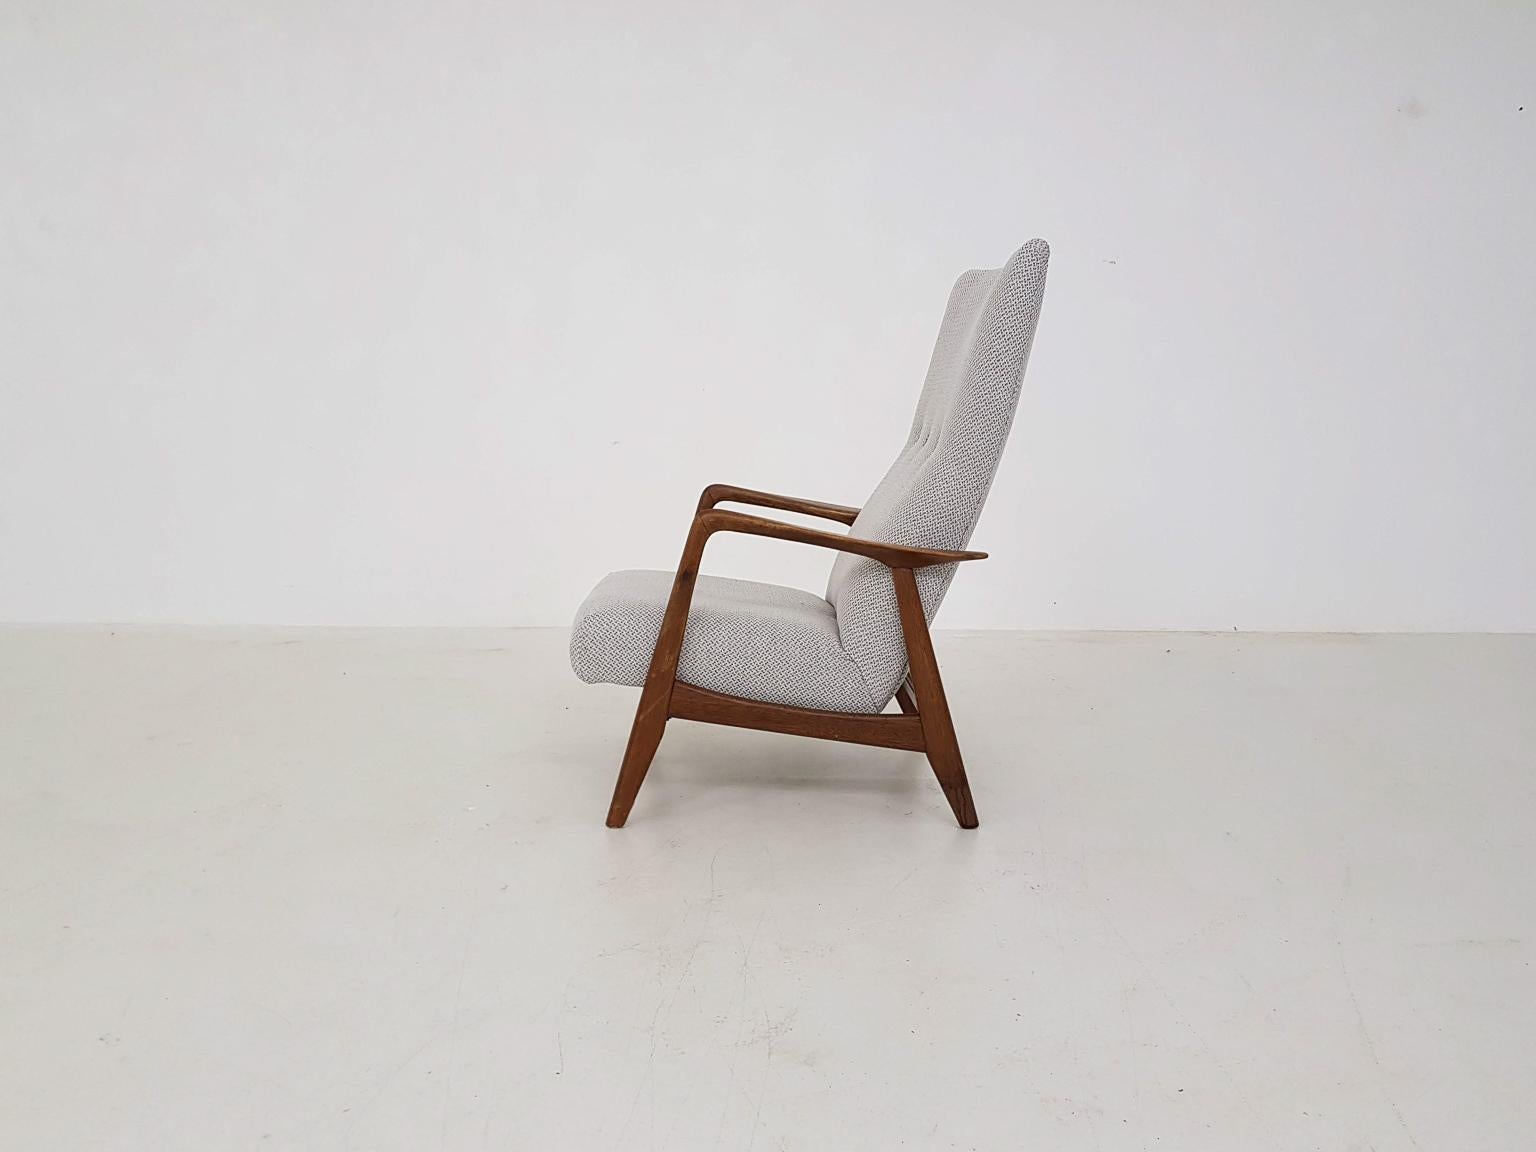 Recliner lounge chair attributed to Alf Svensson or Folke Ohlsson for DUX, Denmark, 1960s

This Comfortable lounge chair from the 60s has a beautiful teak wooden frame with elegant, typical Danish mid century modern shapes.  We reupholstered the